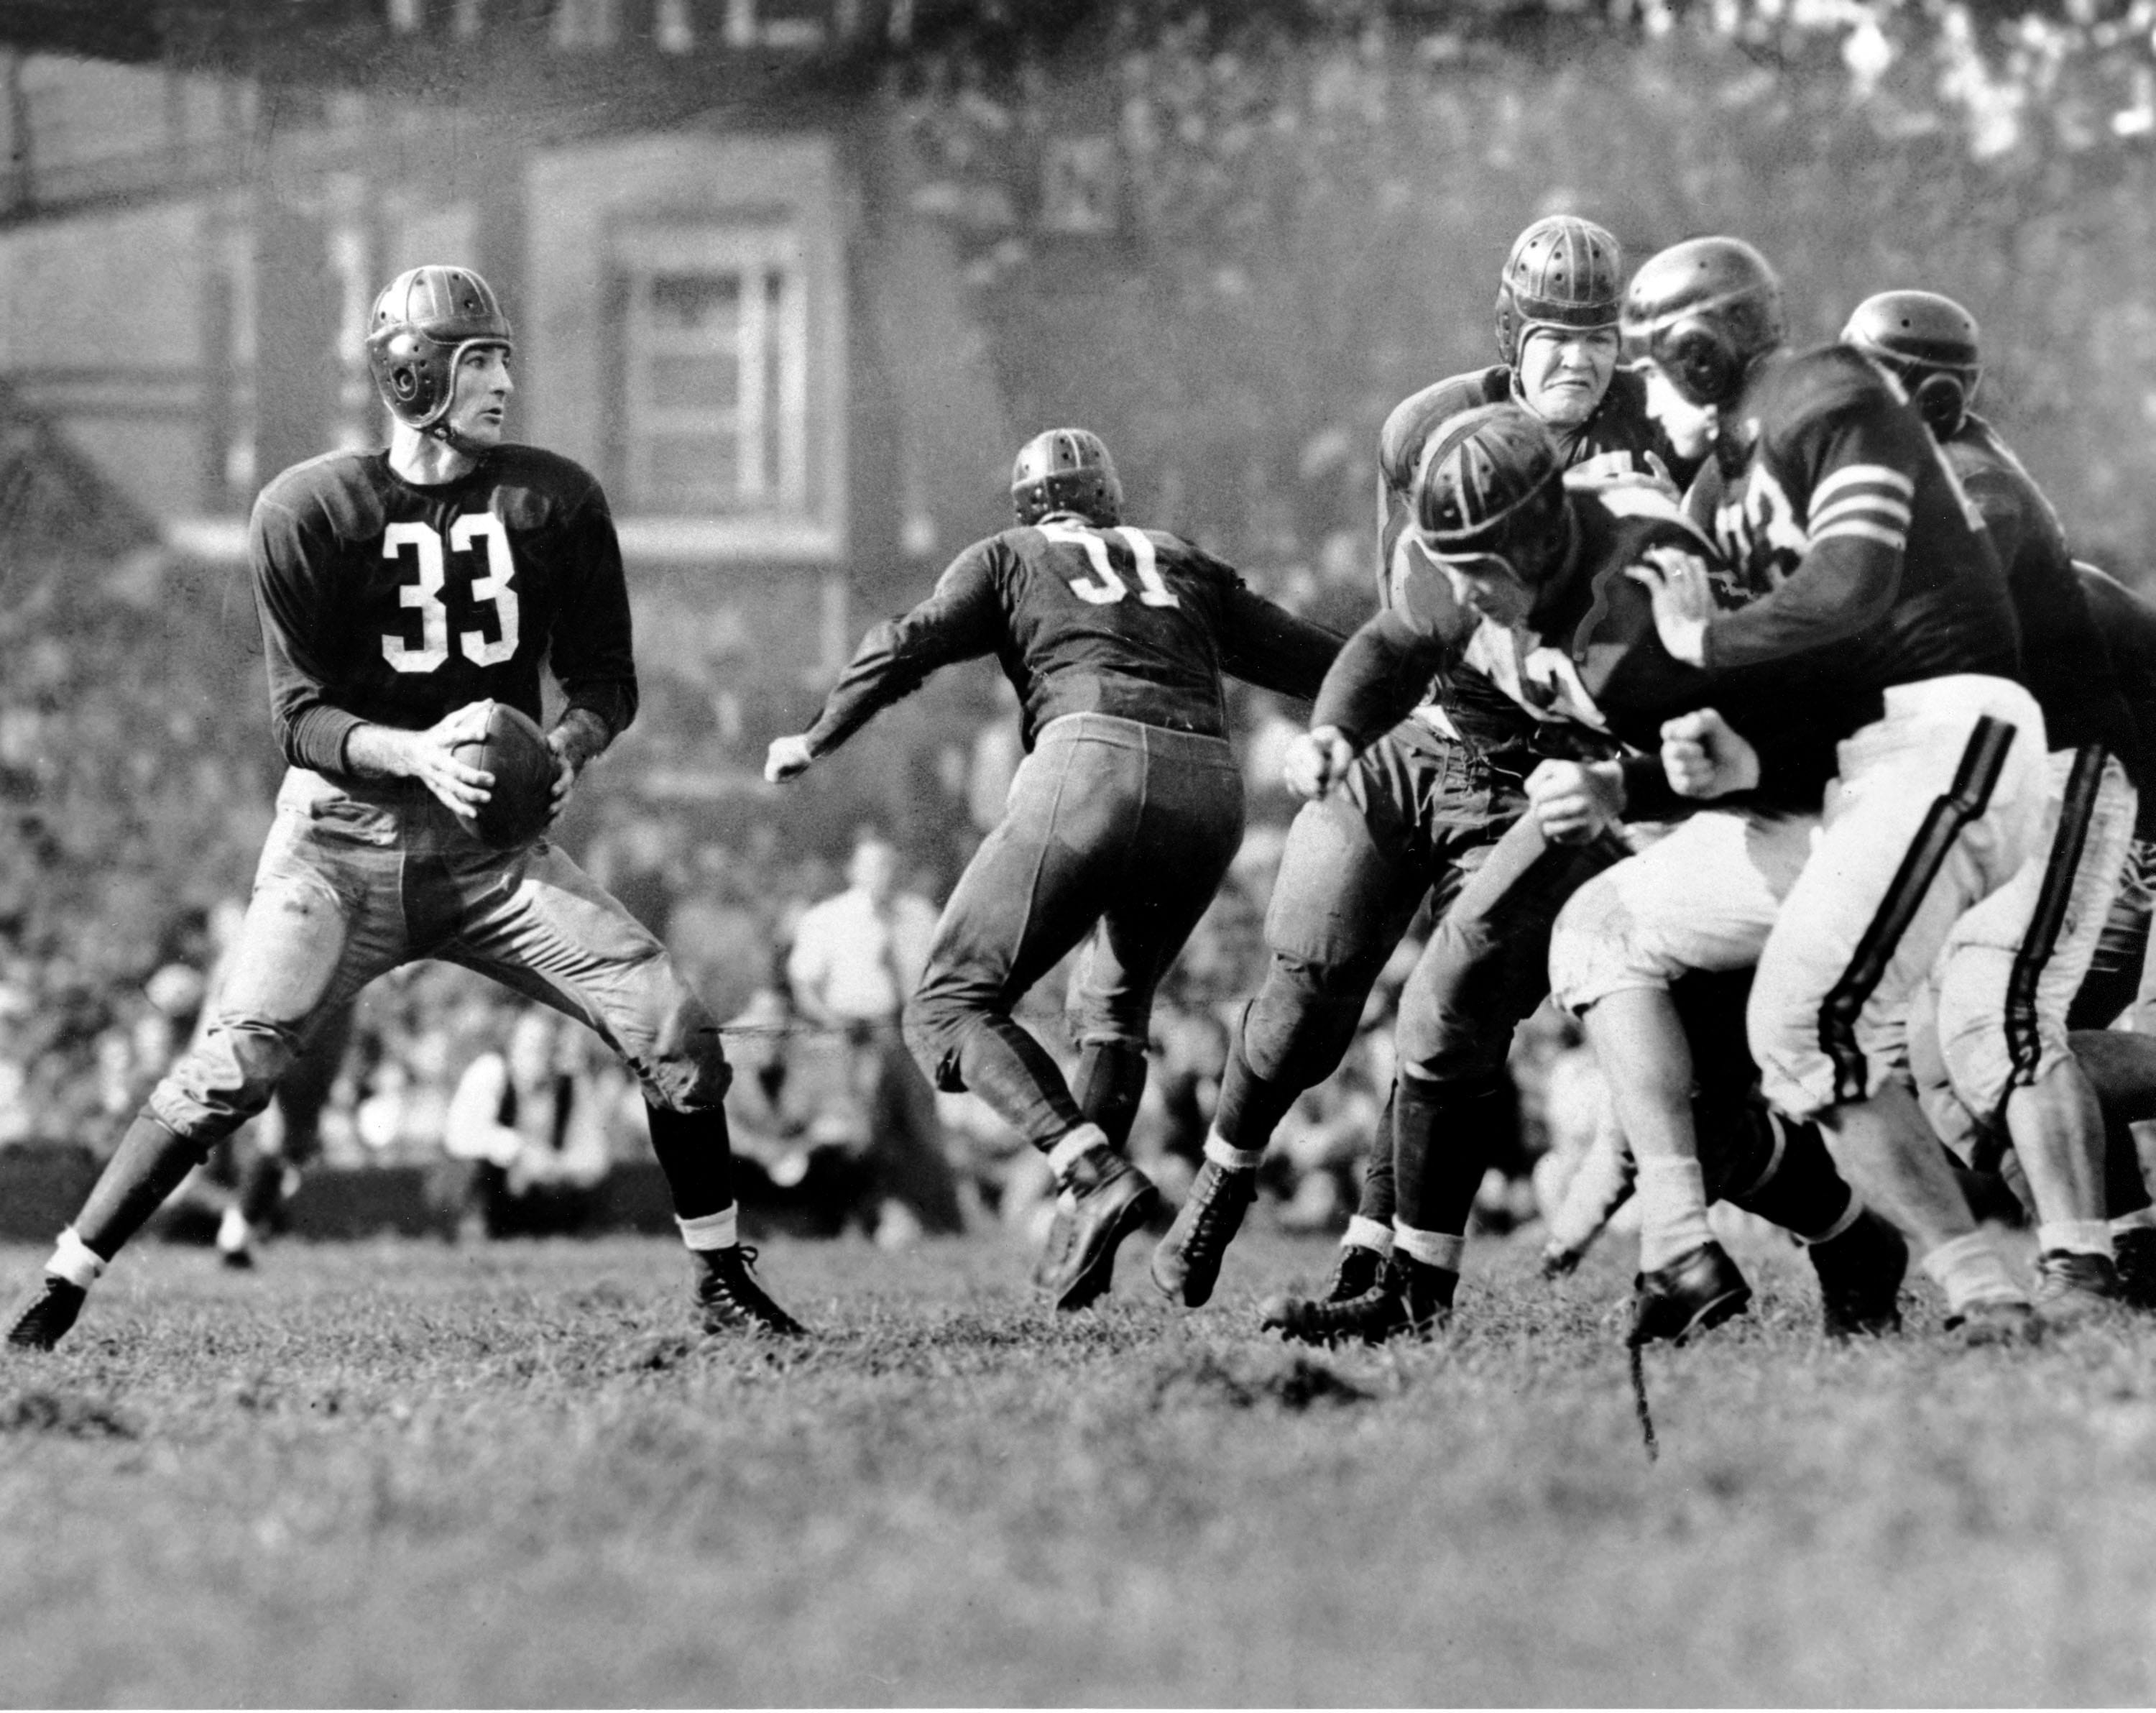 Washington Redskins' Sammy Baugh looks to pass during a game against the Chicago Bears in Sept. 1942.